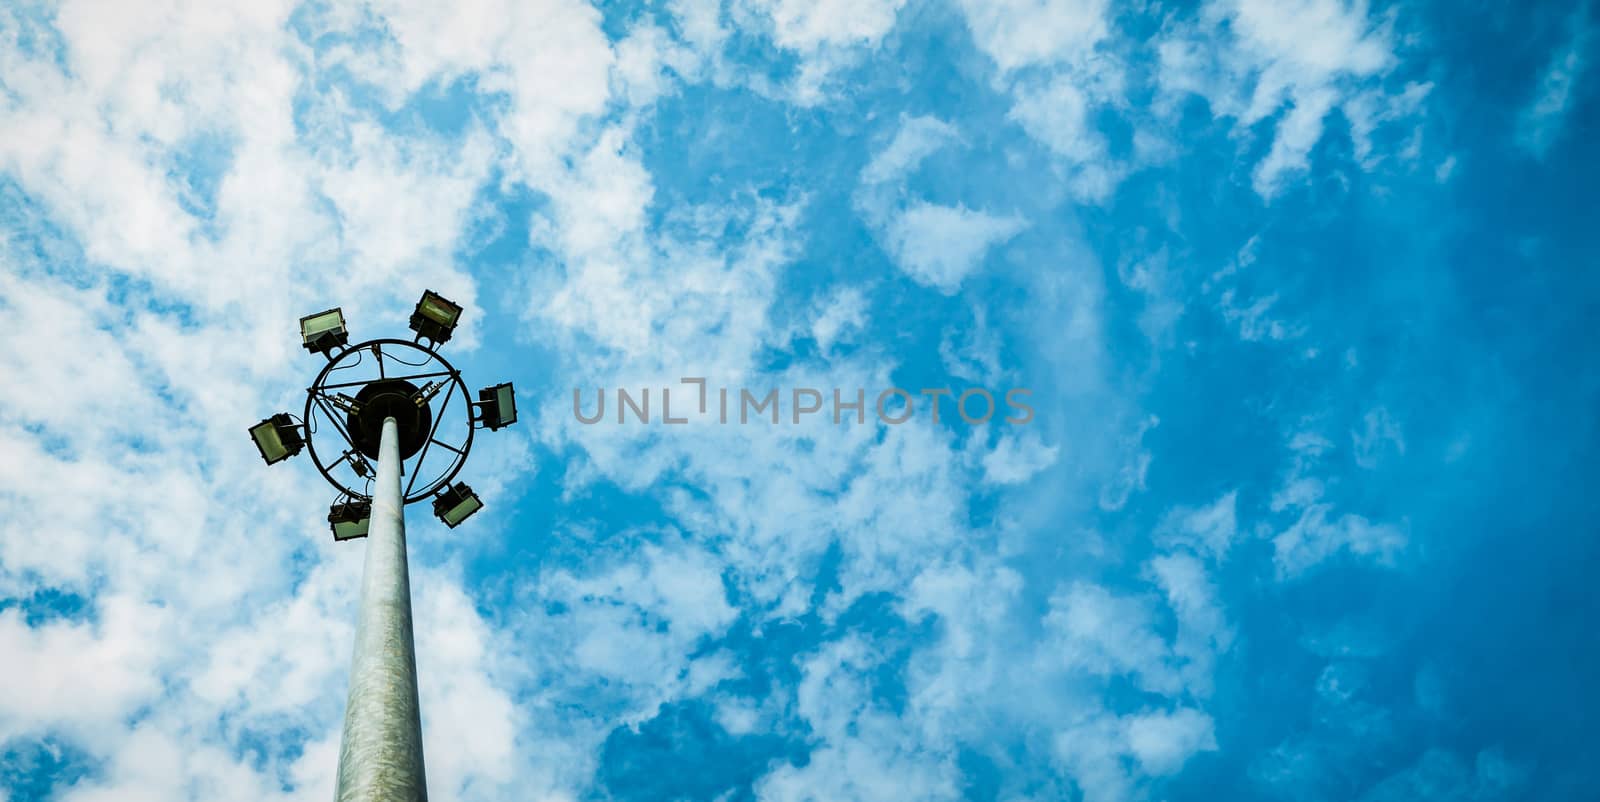 Sport lights of the stadium with pole on beautiful blue sky and white cumulus clouds with copy space for text. by Fahroni